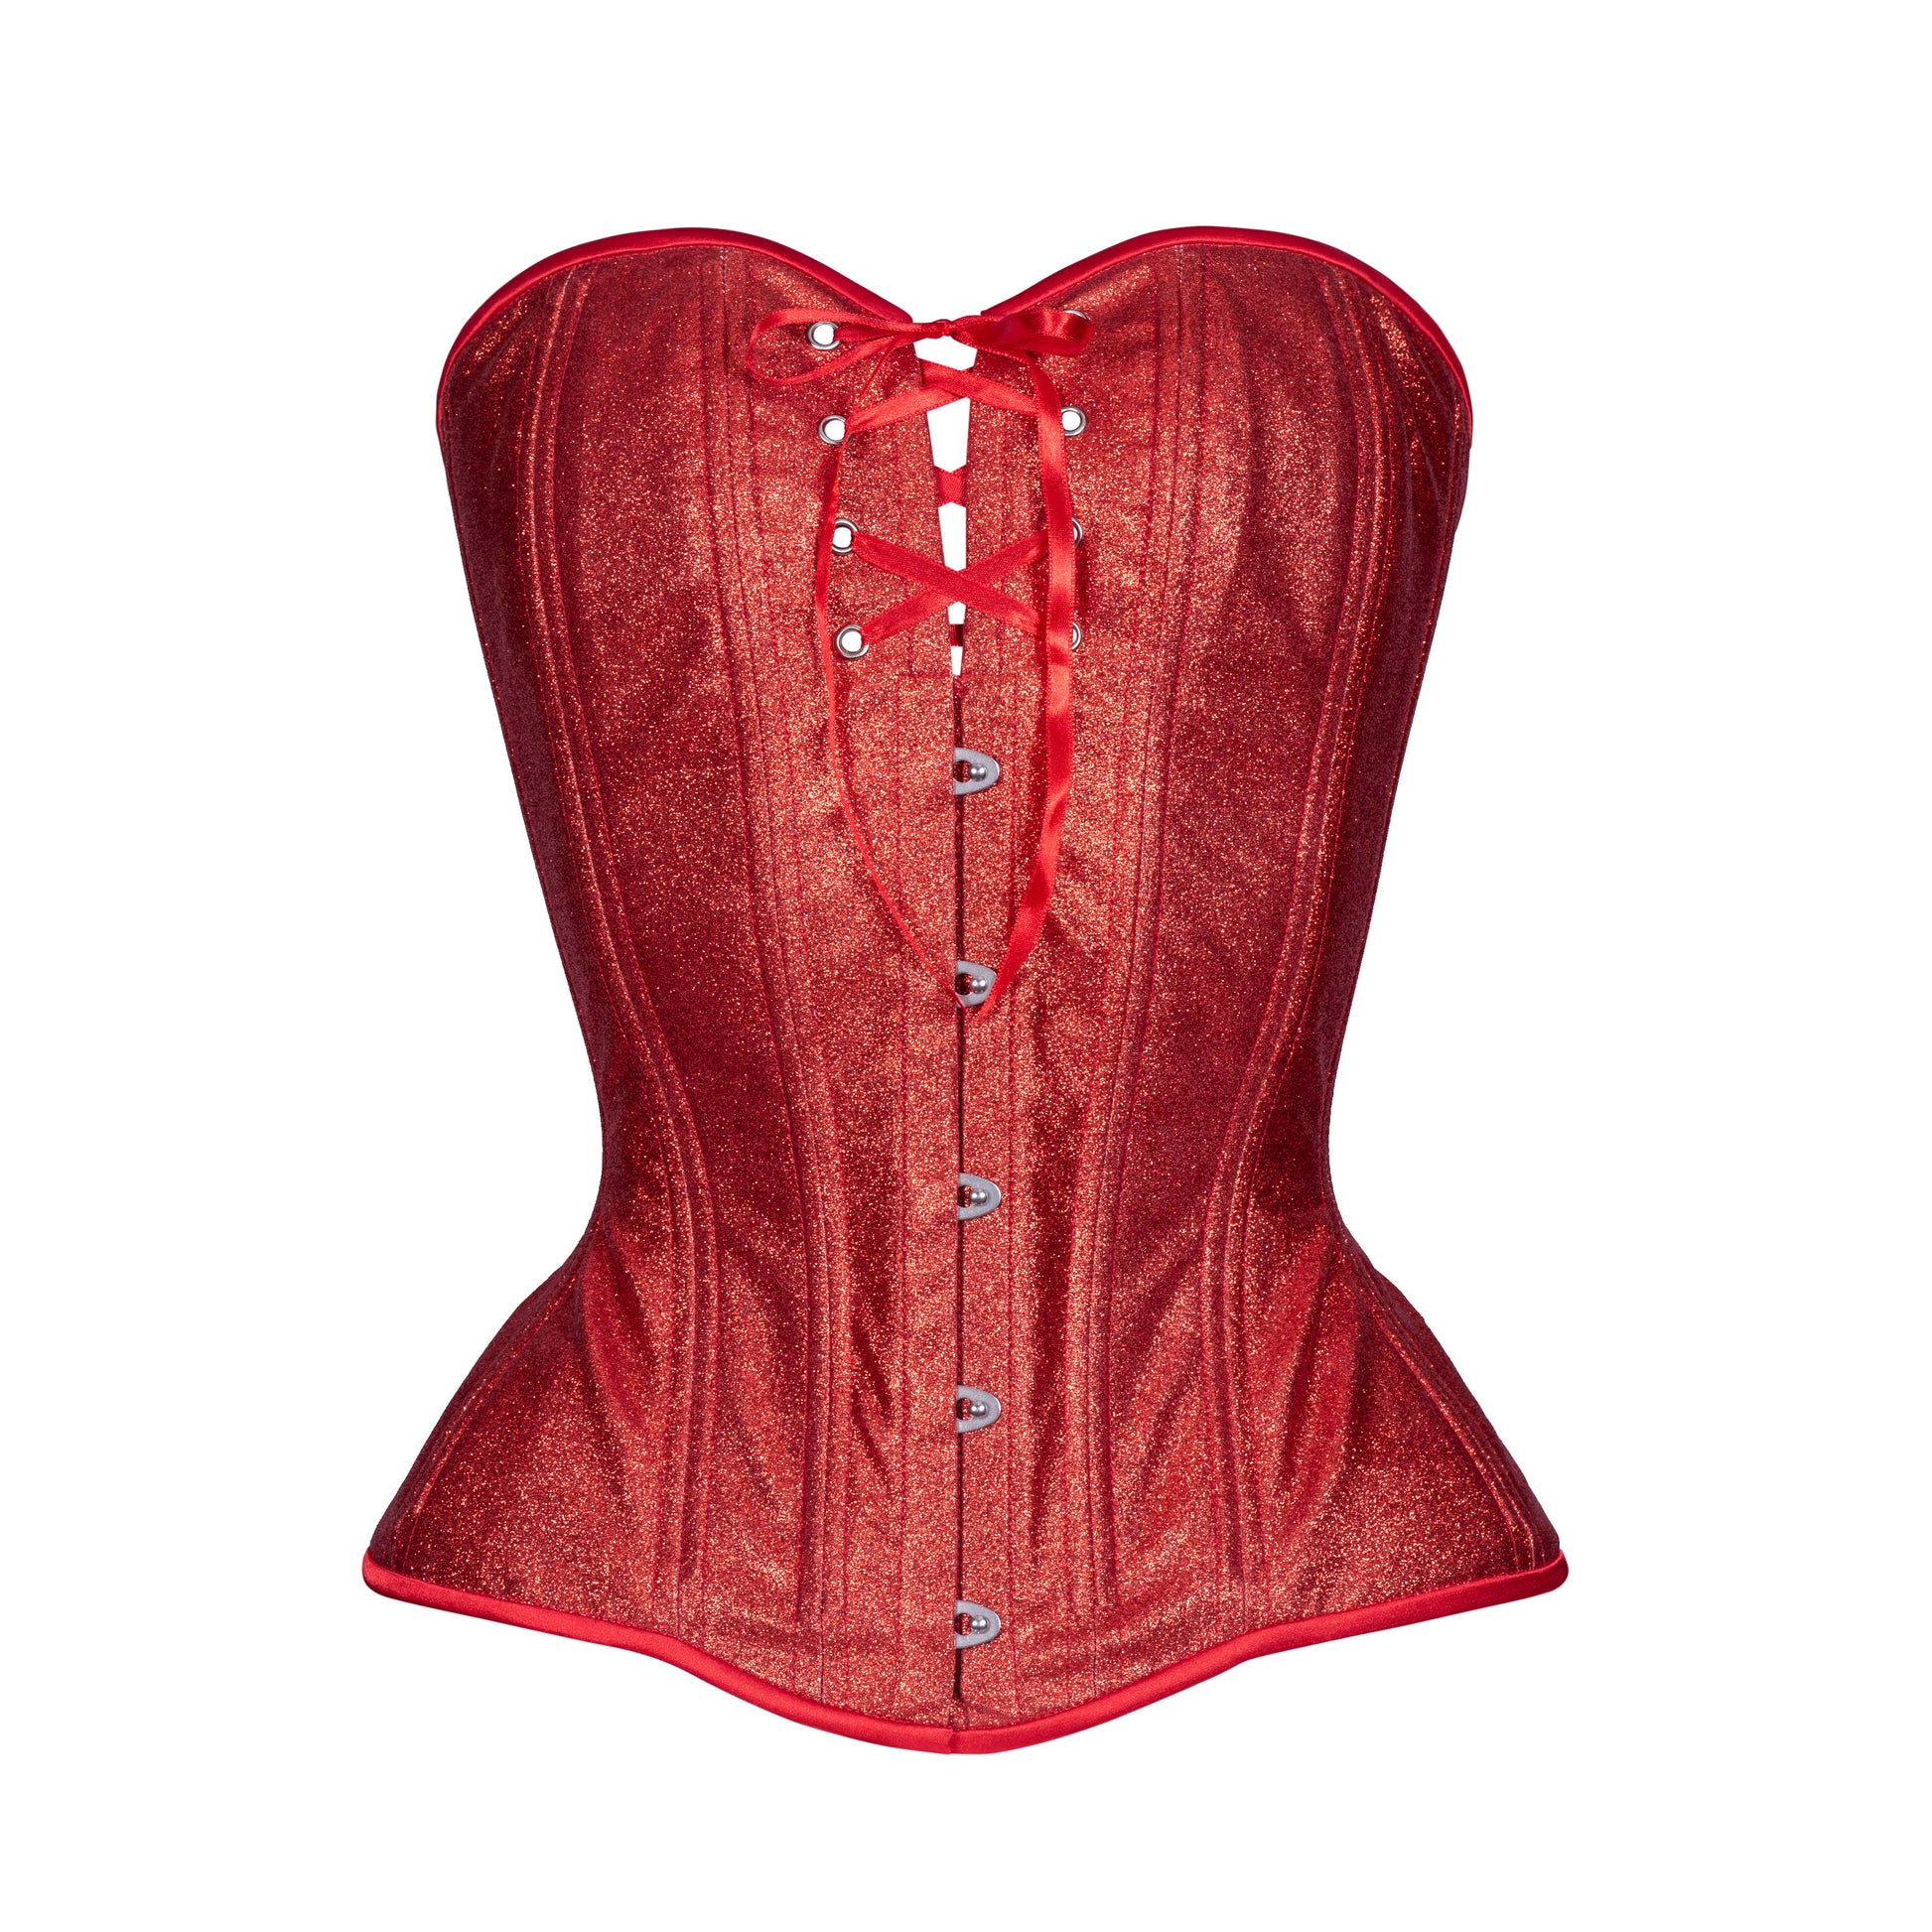 How to Wear a Corset Under or Over your Dress? – Bunny Corset